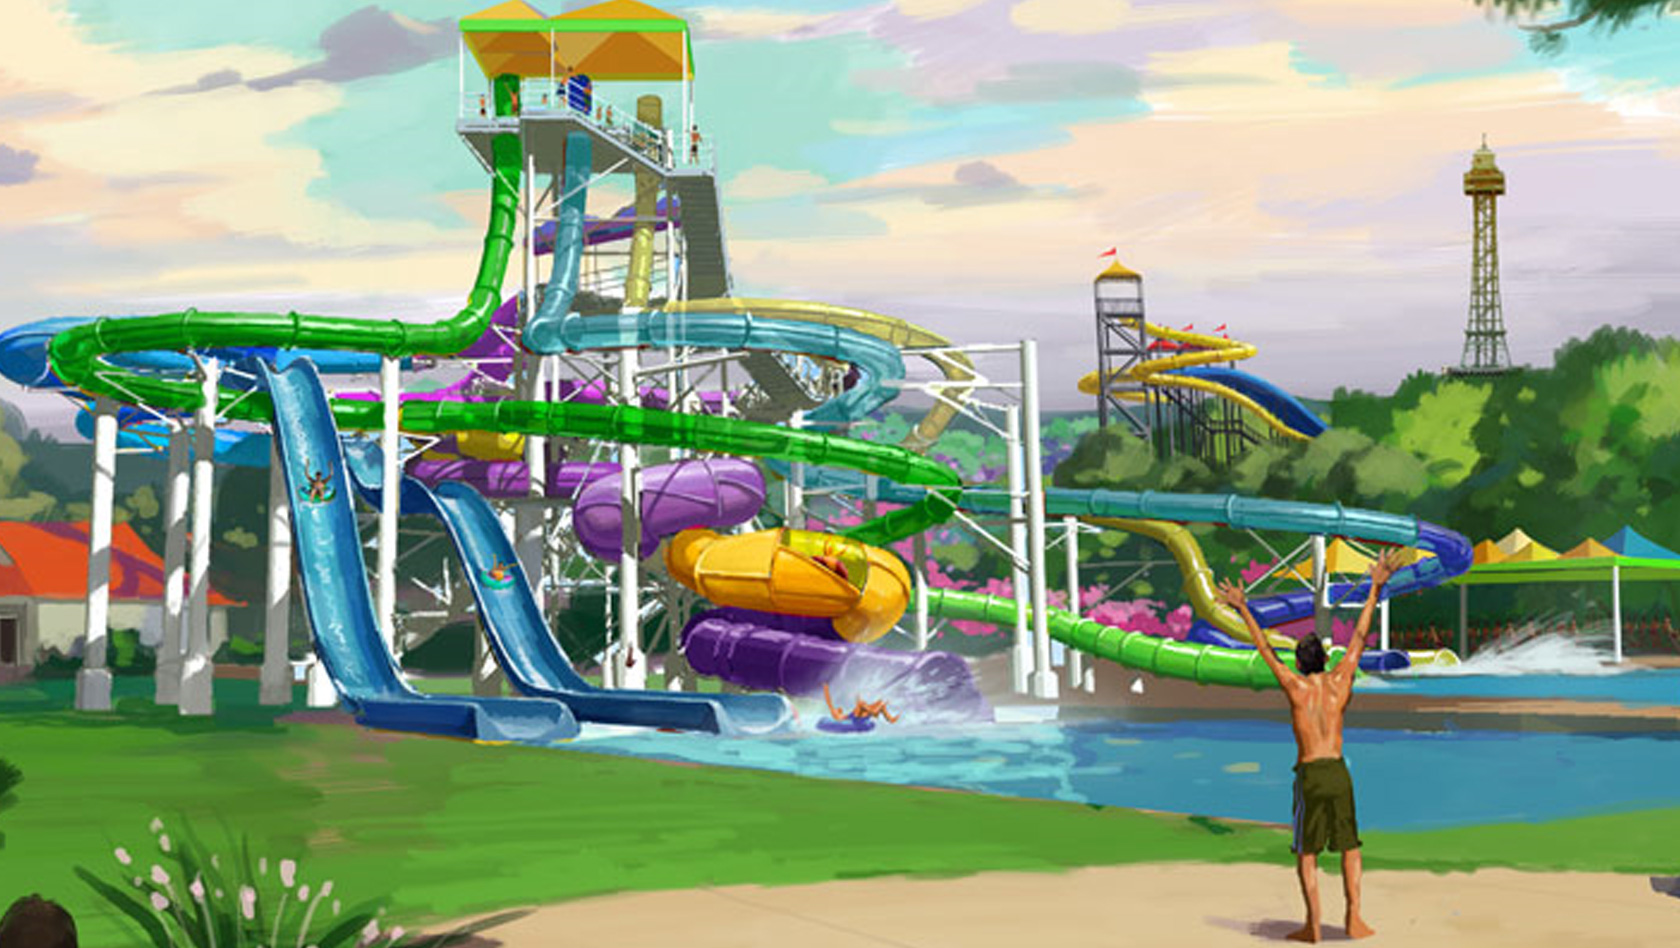 Kings Island - Tropical Plunge Concept